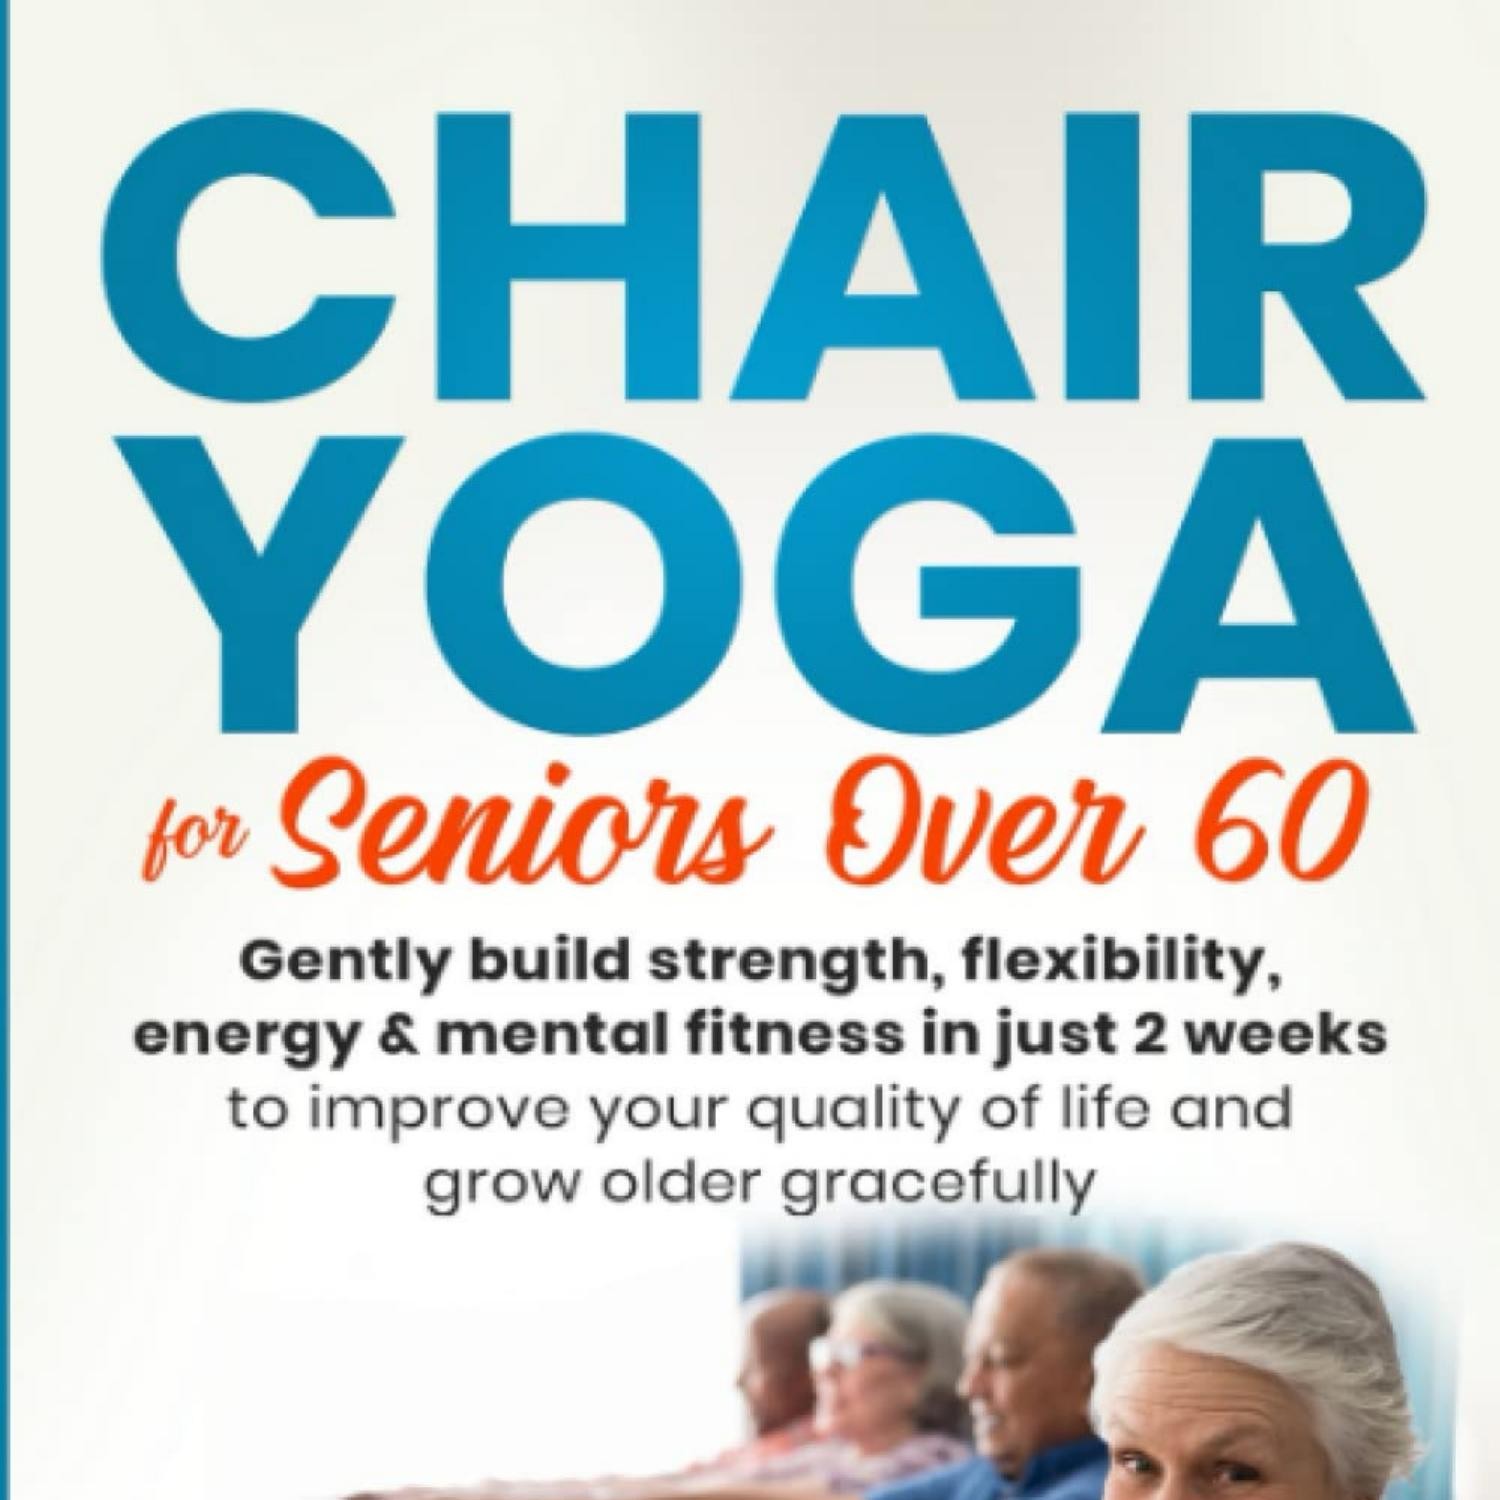 eBOok by : Chair Yoga for Seniors Over 60: Improve Your Balance, Strength,  and Mobility in Just 21 by ParideLorenzo7466797 - Issuu